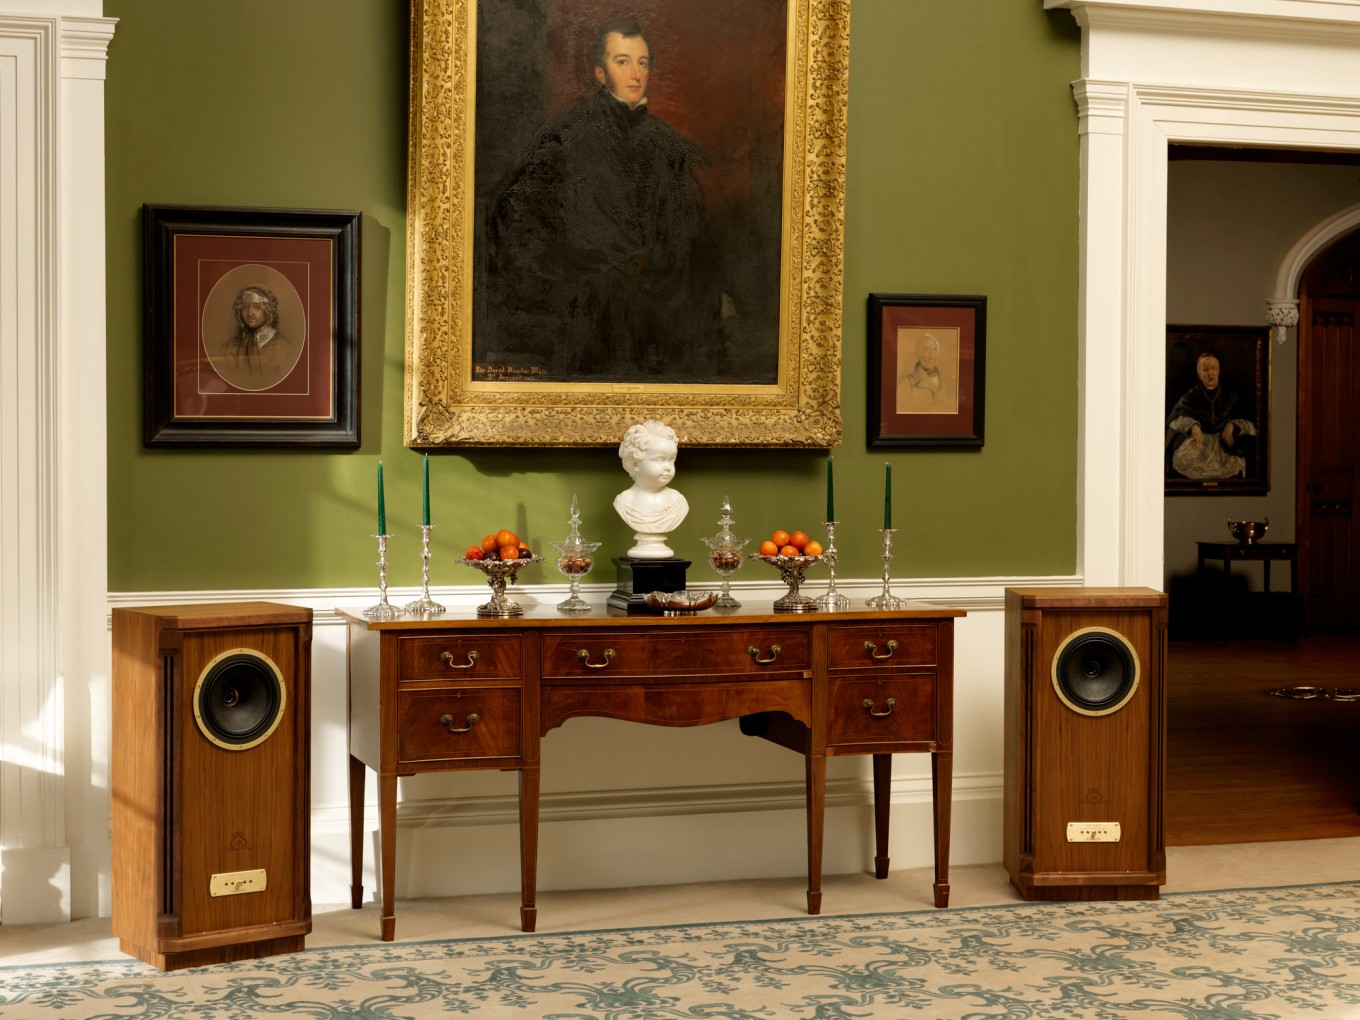 Tannoy-Turnberry-Image-1